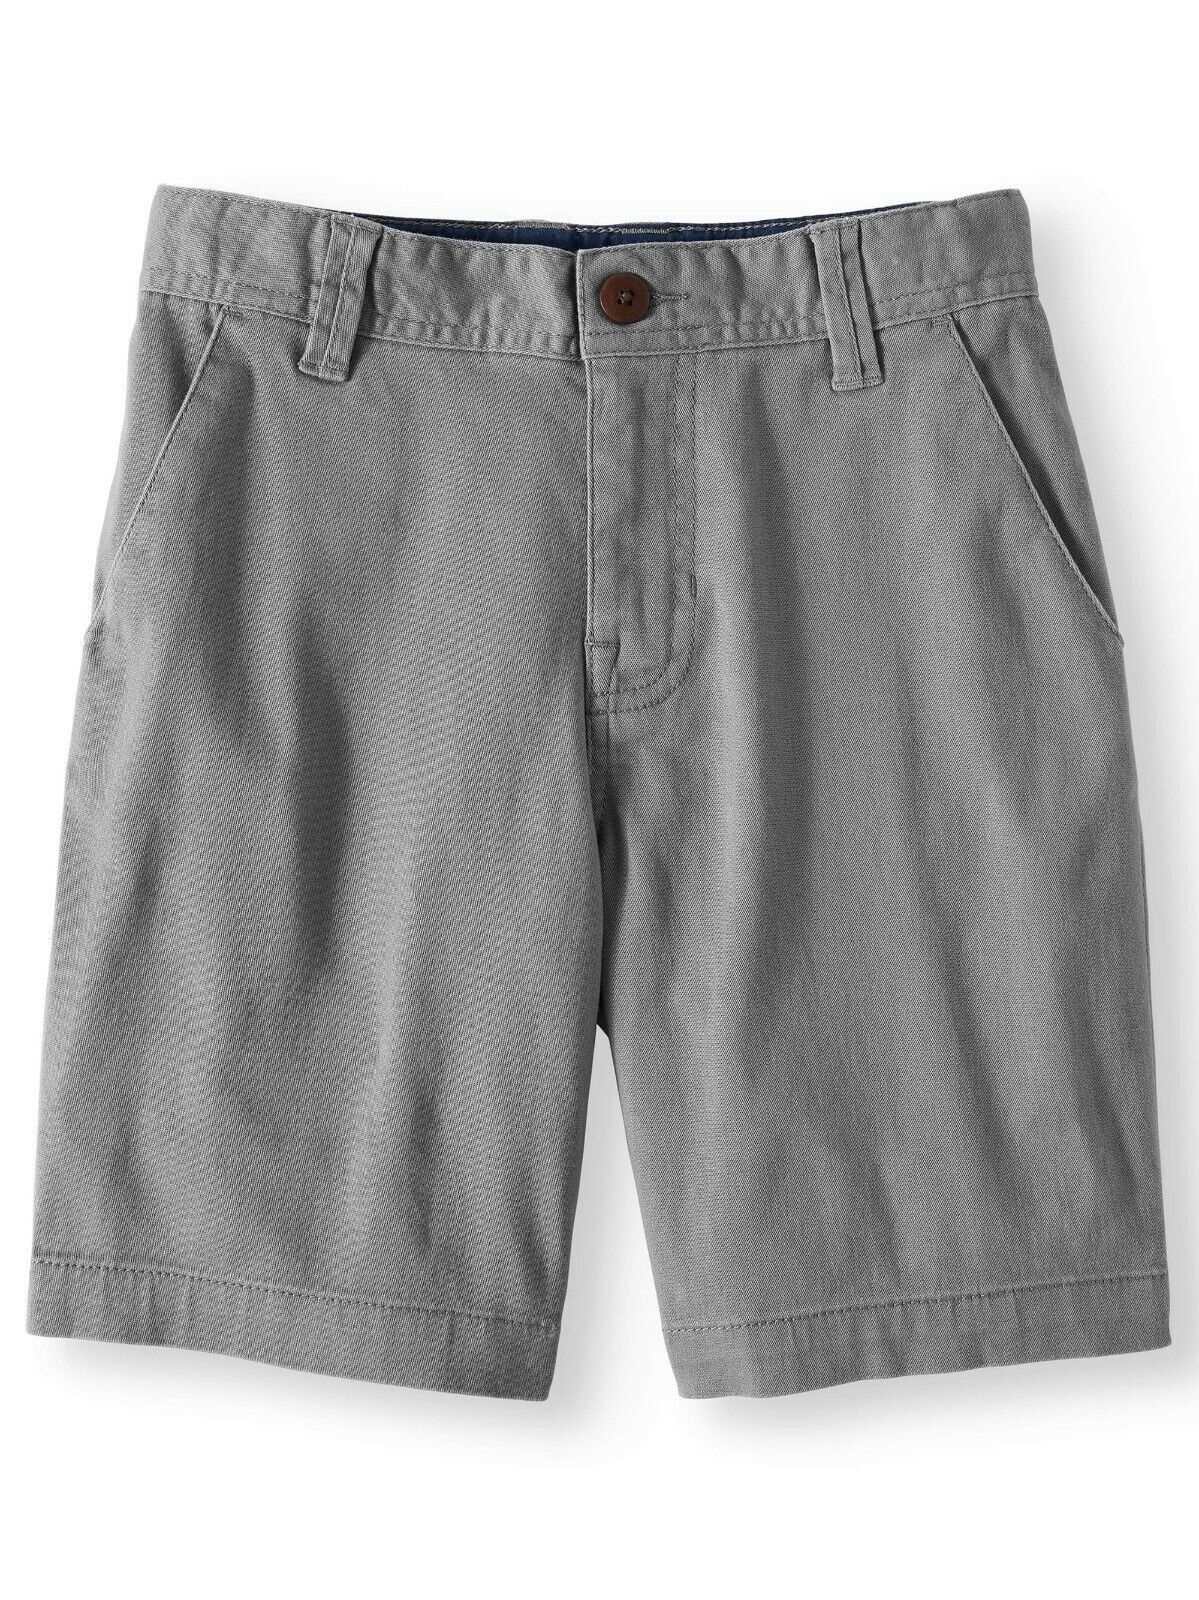 Primary image for Wonder Nation Boys Flat Front Shorts Size 7 Grey School Uniform Approved NEW